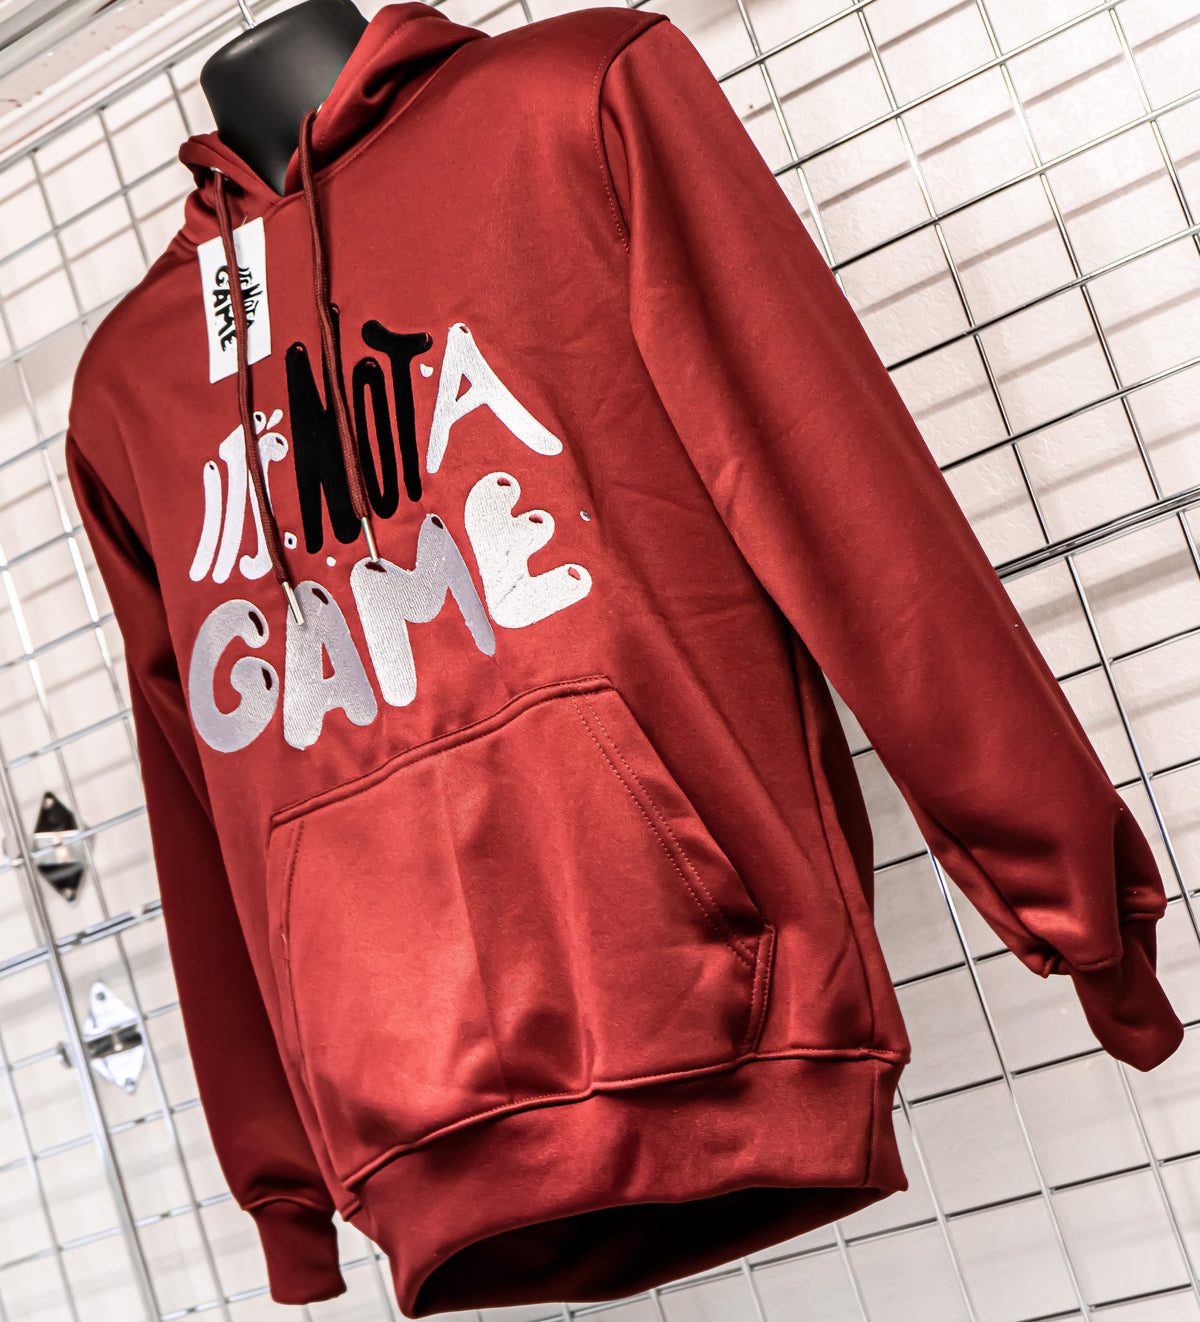 It’s Not a Game Maroon Embroidered Pullover Hoodies - It's Not A Game Apparel™